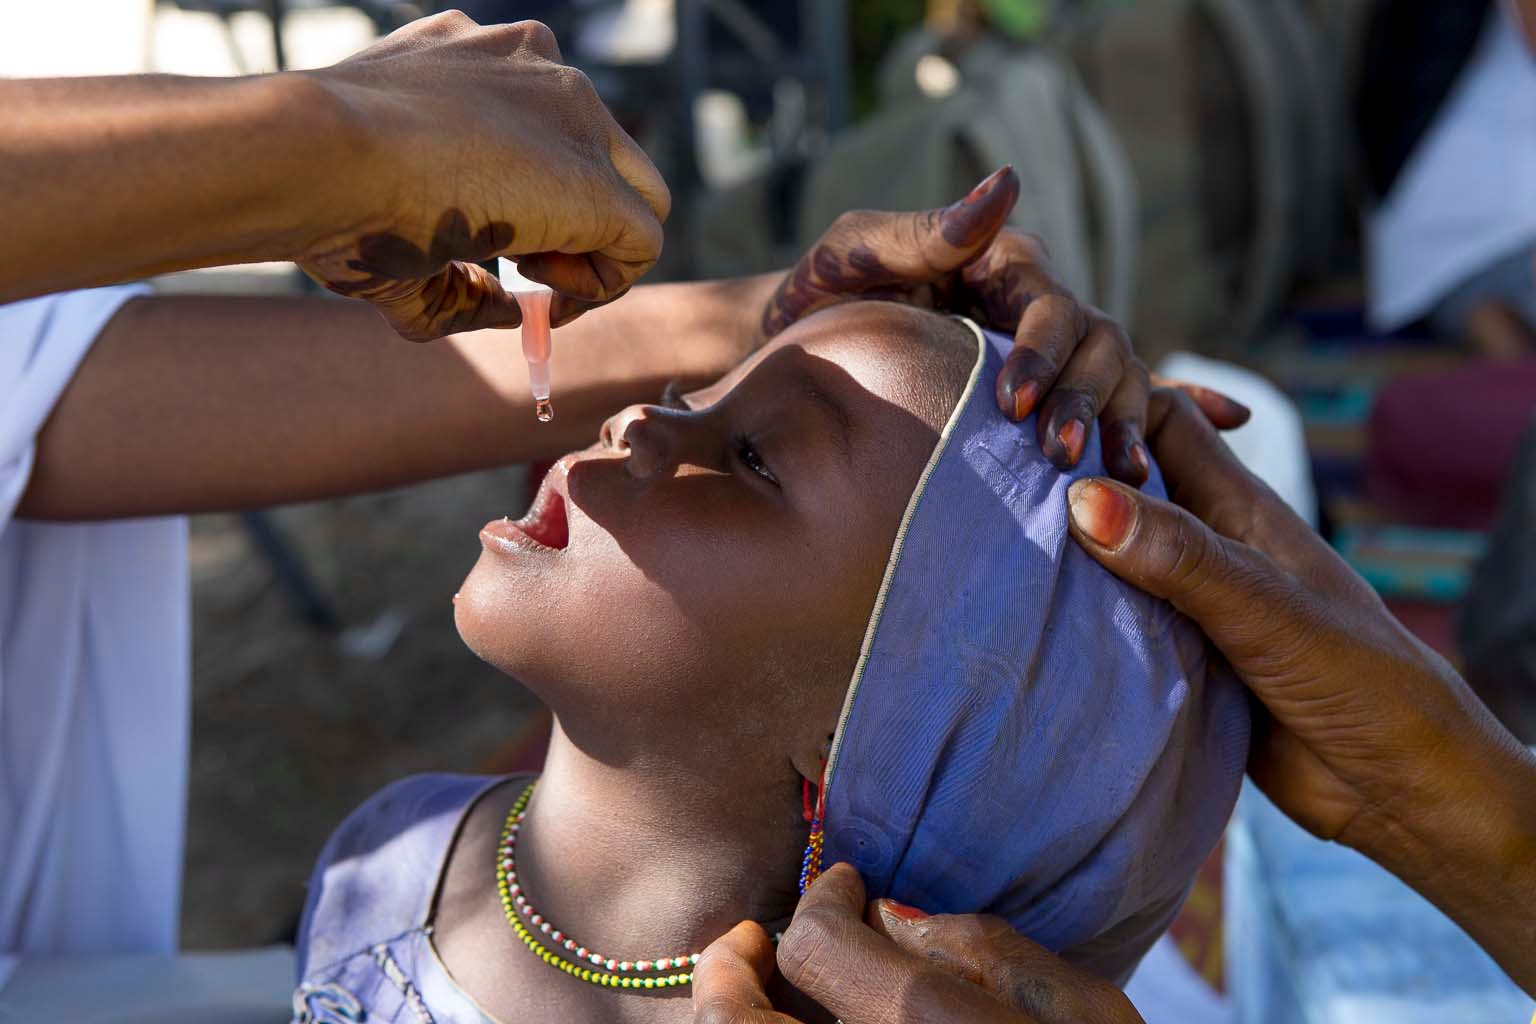 A child is being vaccinated orally in Borno state, Nigeria